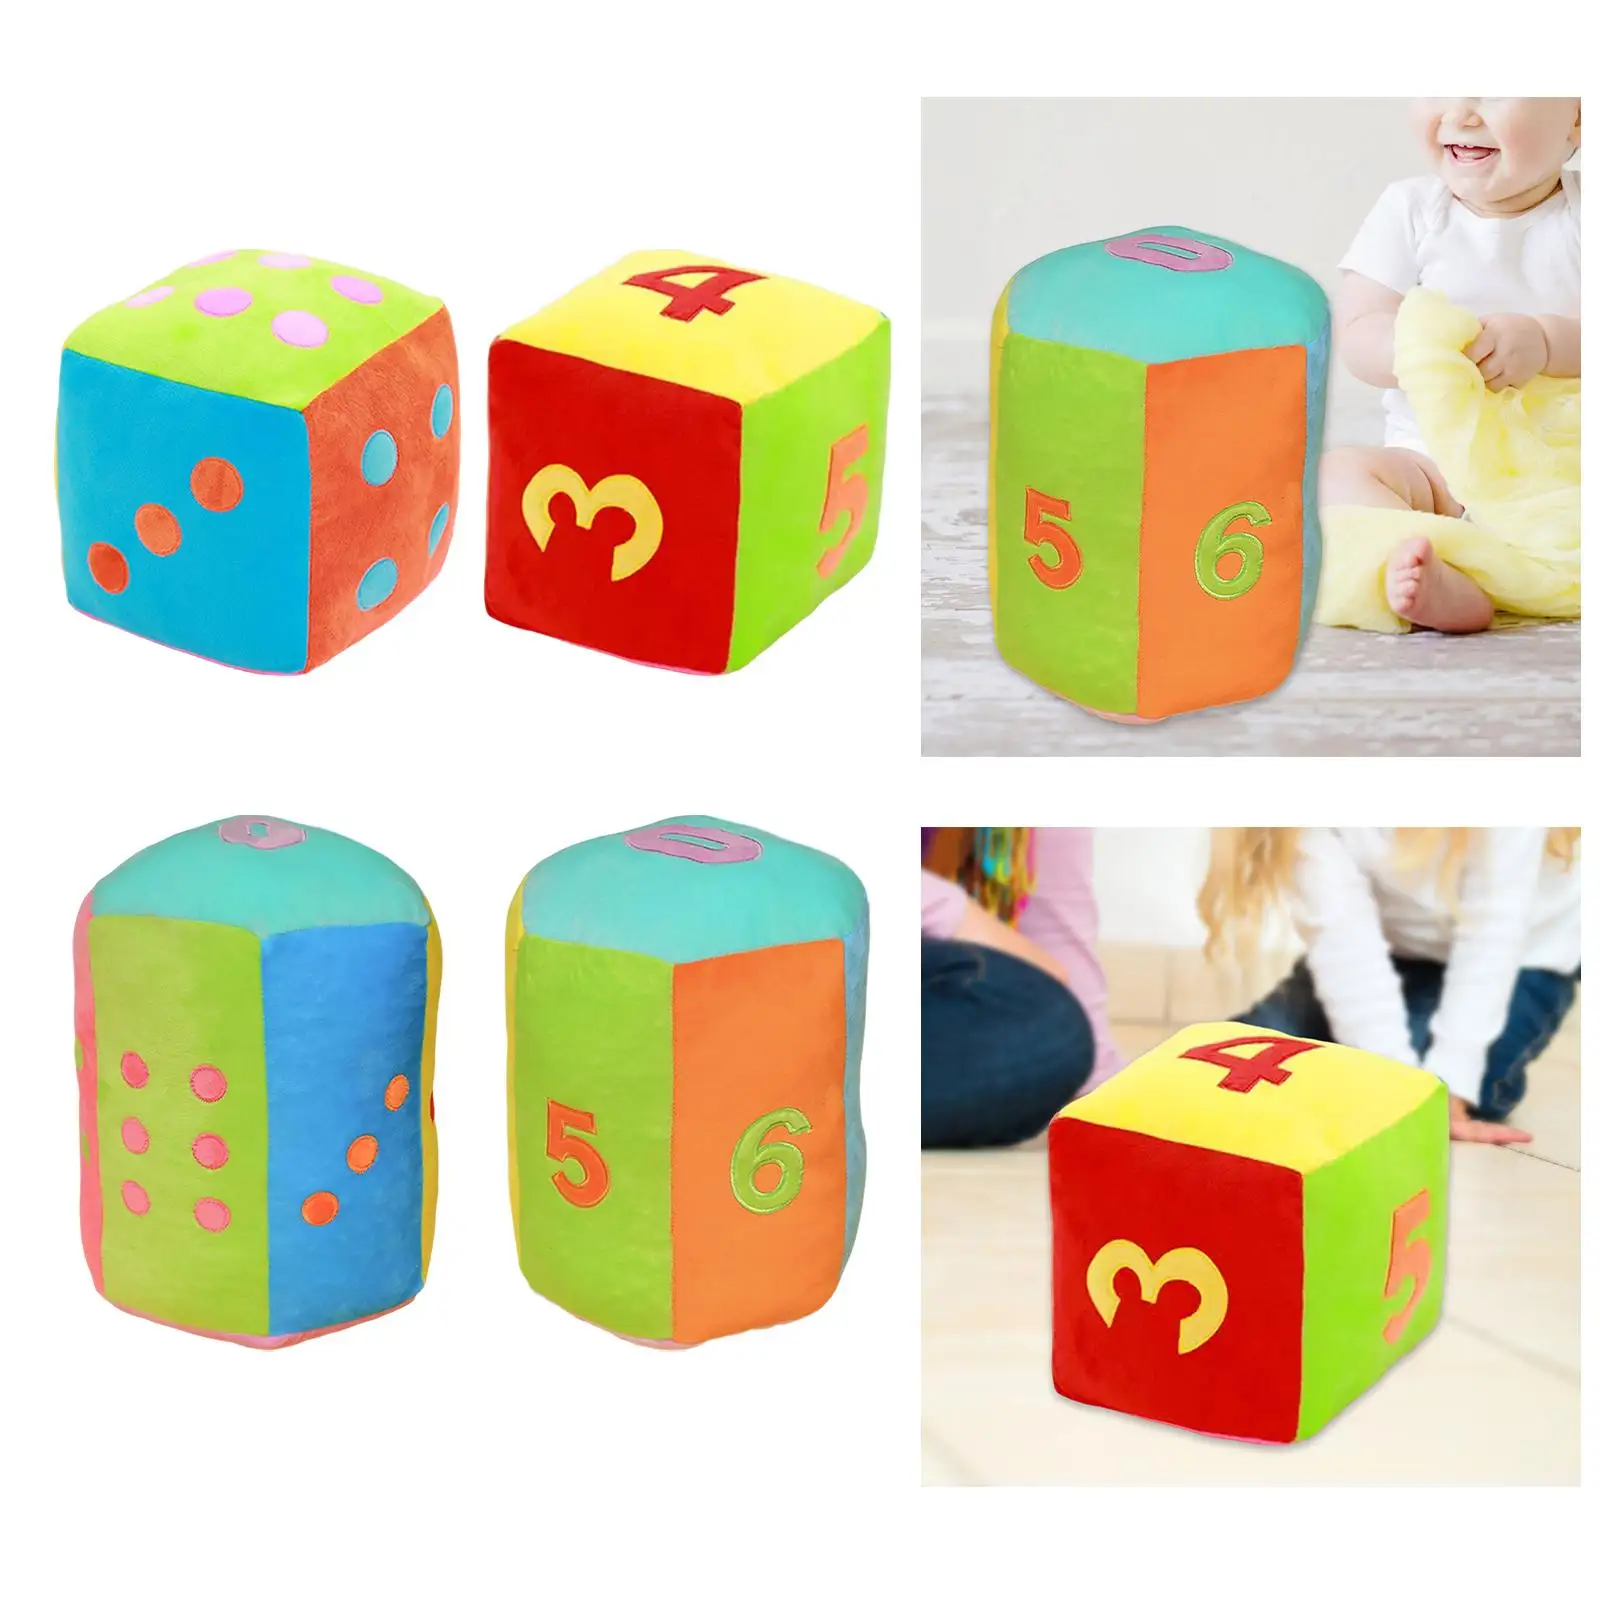 Soft Plush Dice Toy Party Suppliers Fun Playing Games Educational Party